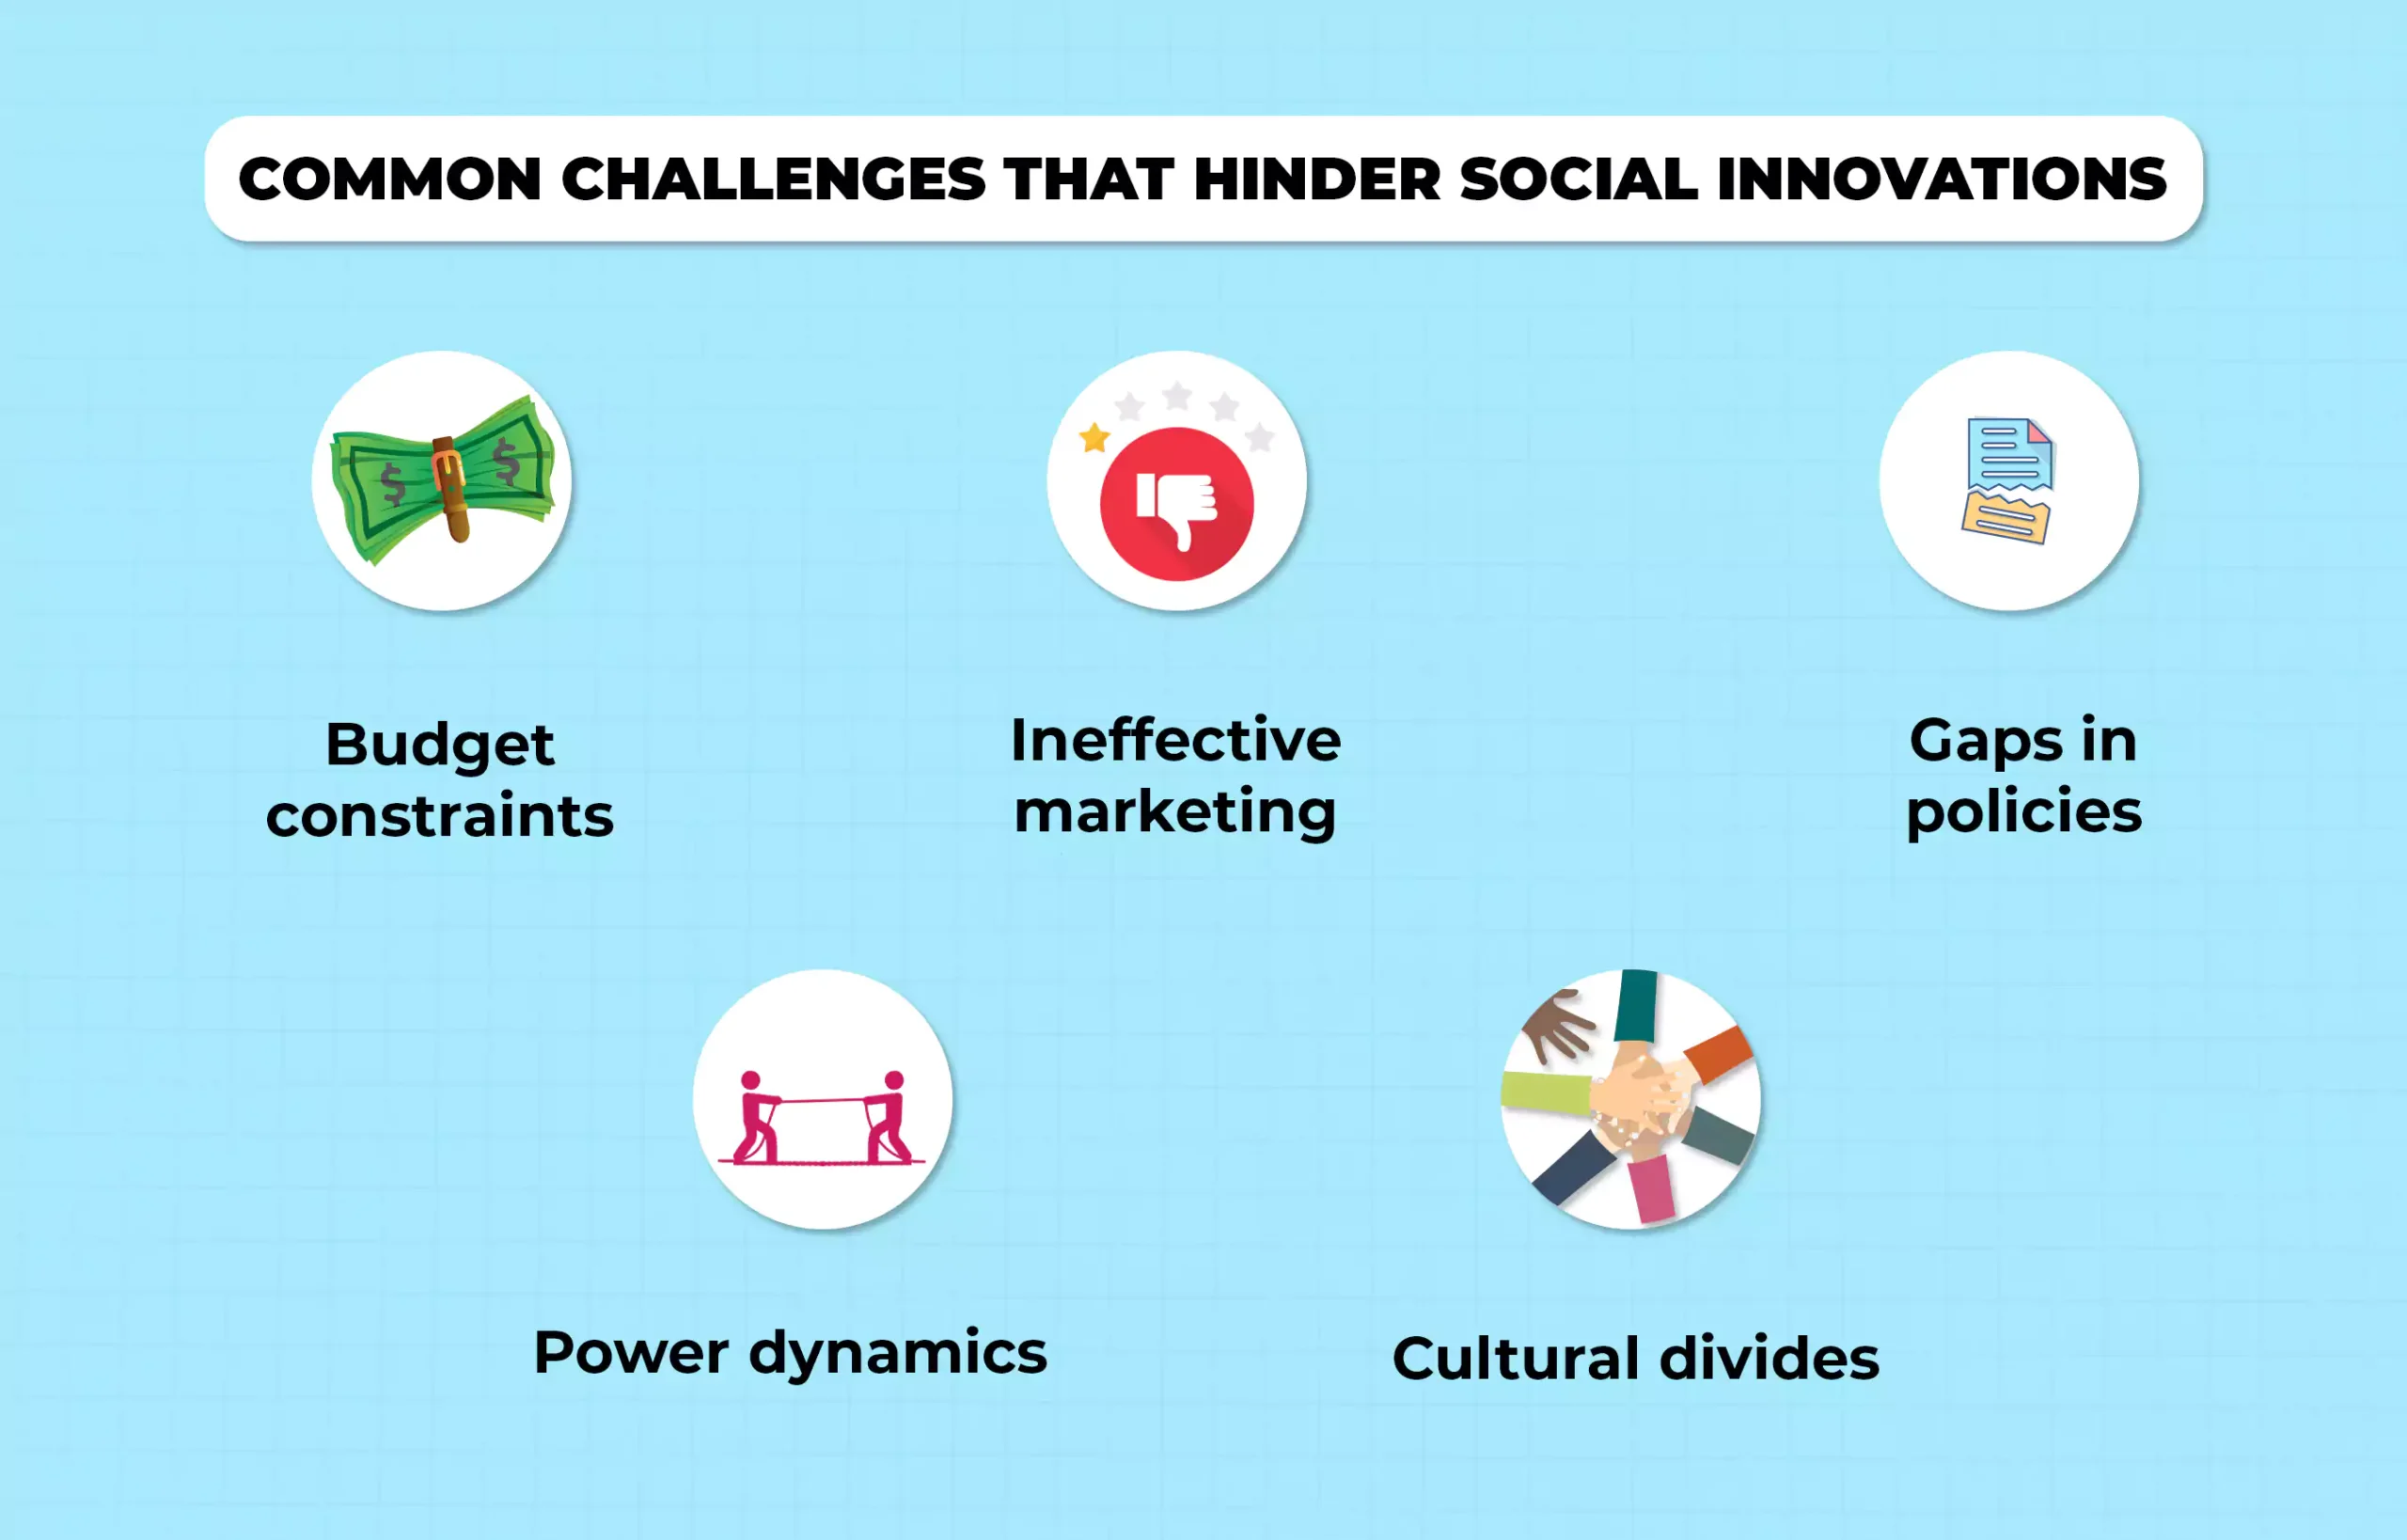 Challenges to social innovations